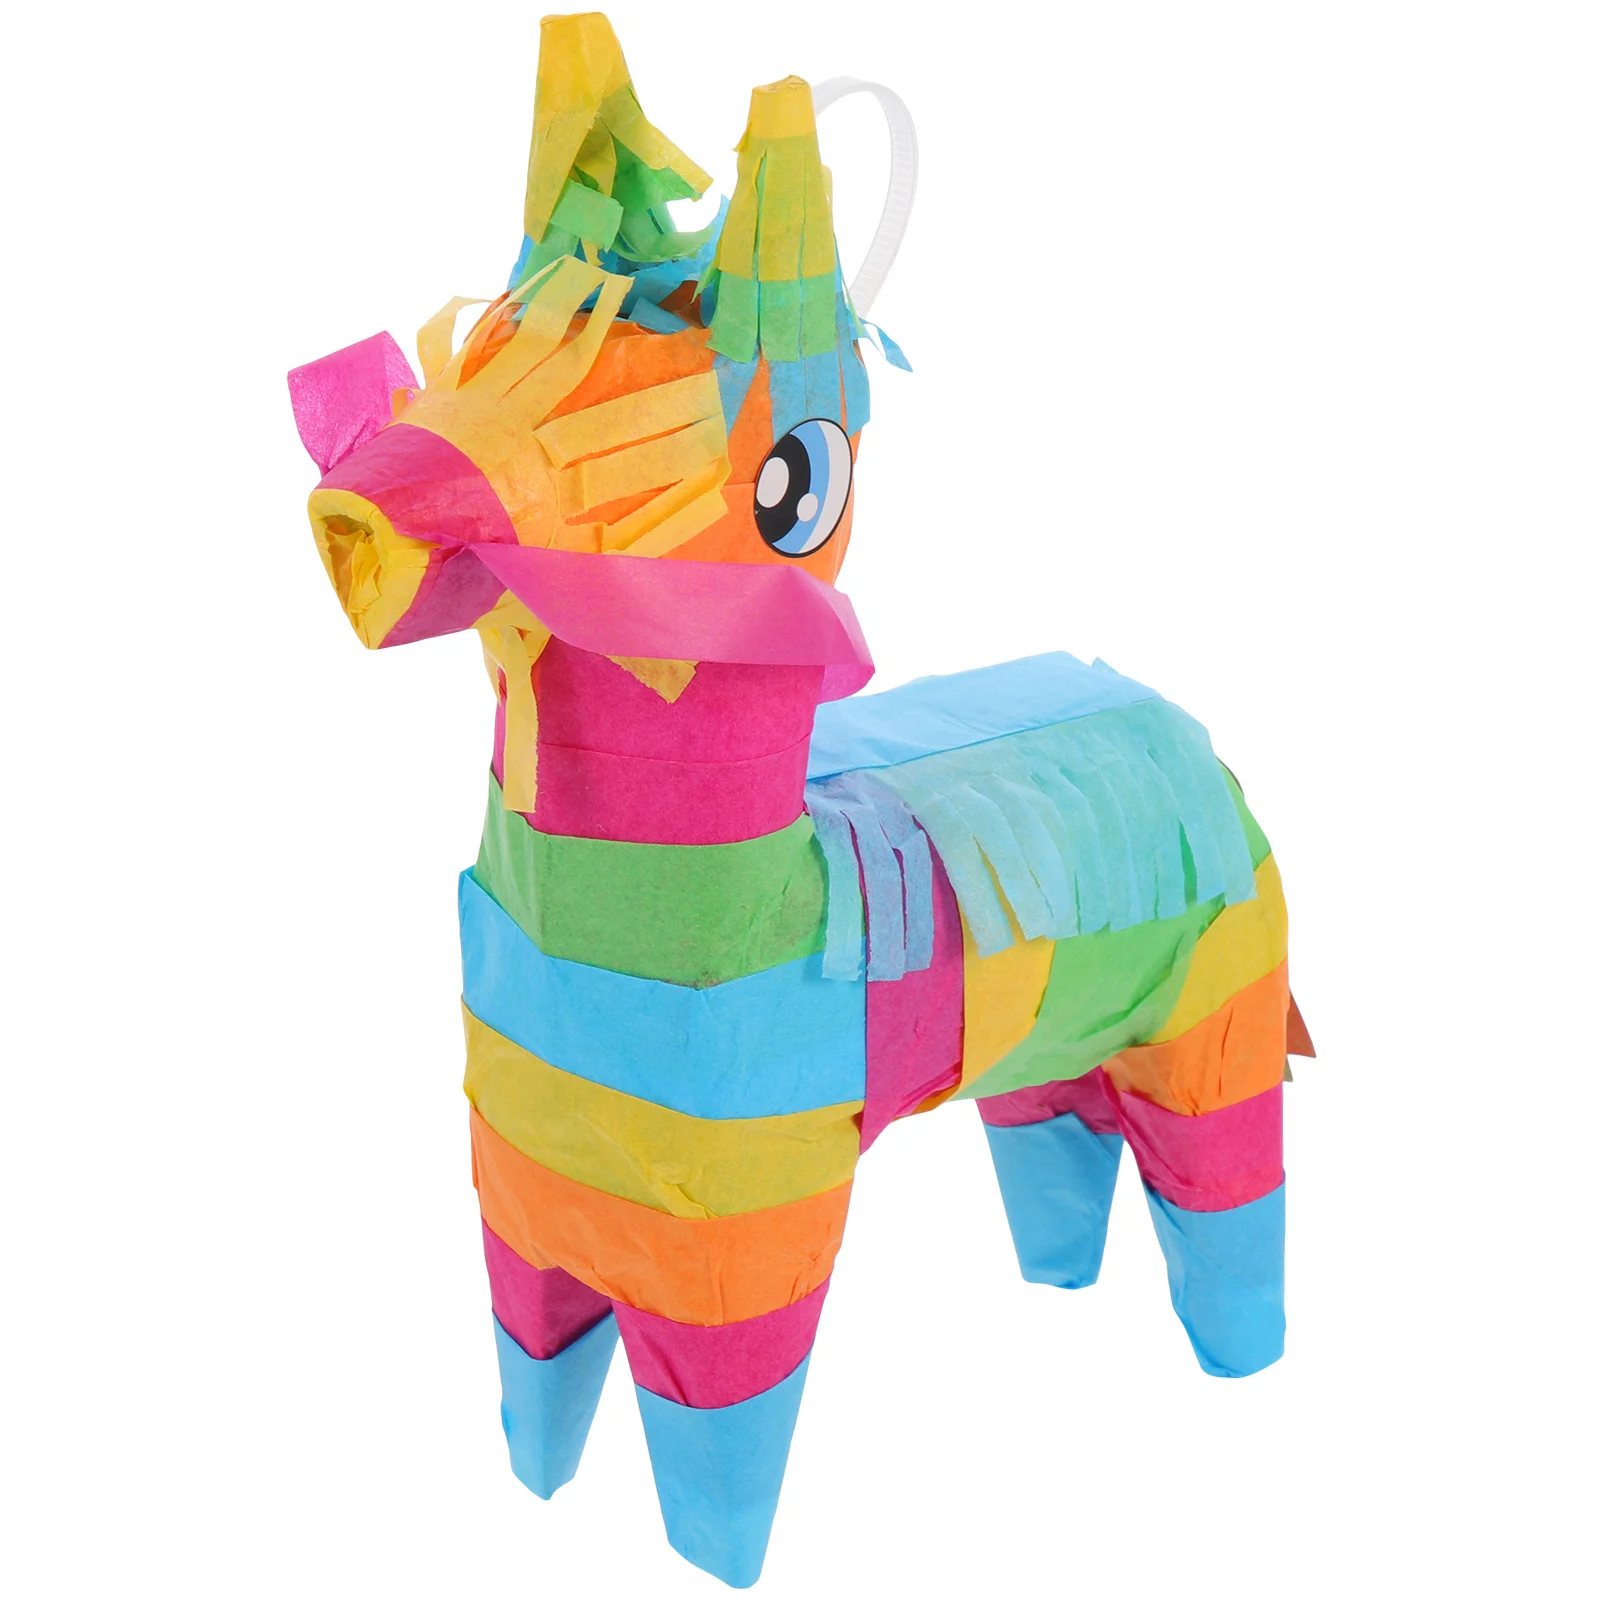 

Pinata Children's Toy Birthday Candy Gift Packing Smashing Party Supply Paper Creative Container